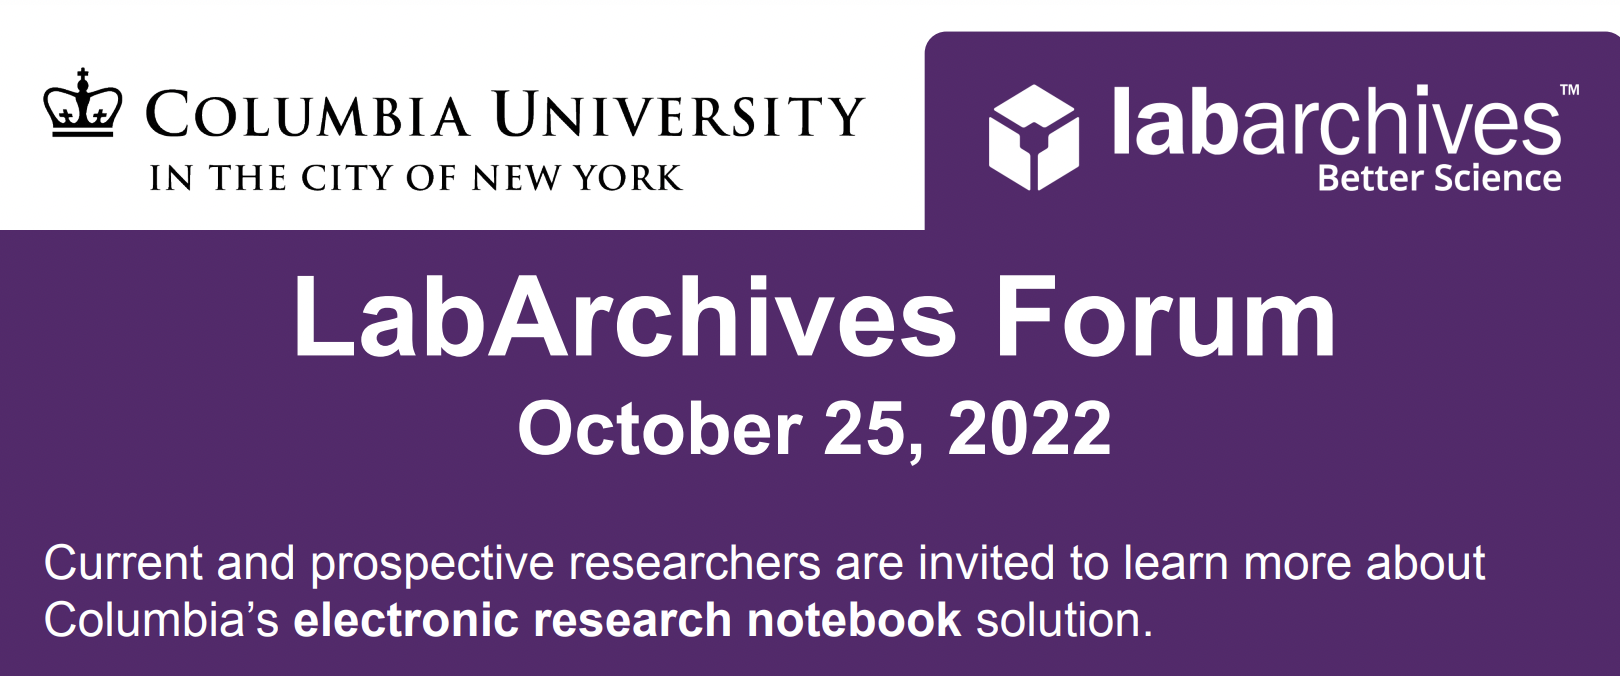 Image of poster snippet with Columbia University and LabArchives logos at top; text reads, "LabArchives Forum October 25, 2022 Current and prospective researchers are invited to learn more about Columbia’s electronic research notebook solution."